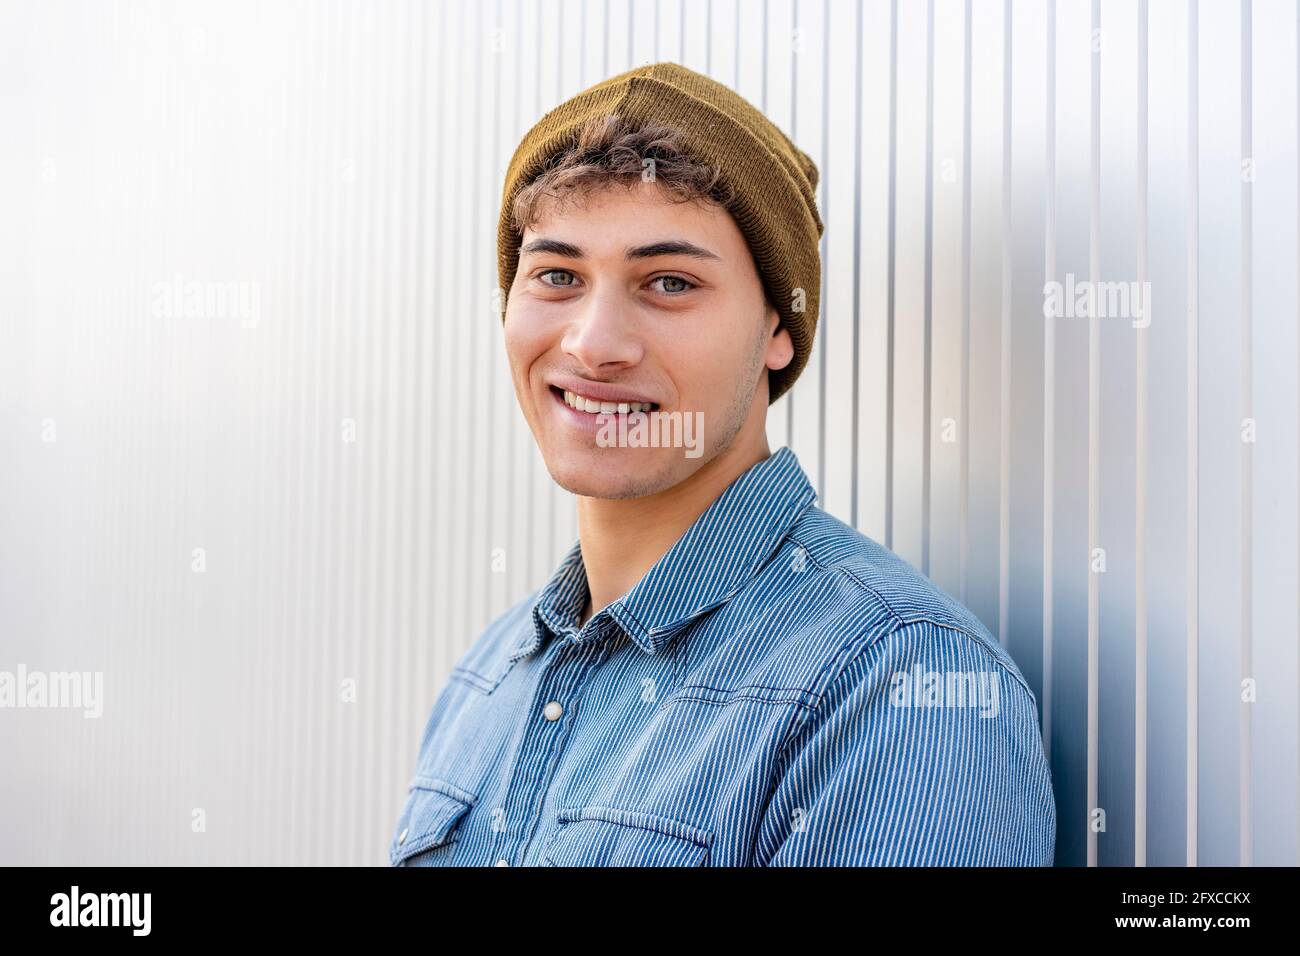 Smiling man wearing knit hat by silver colored wall Stock Photo